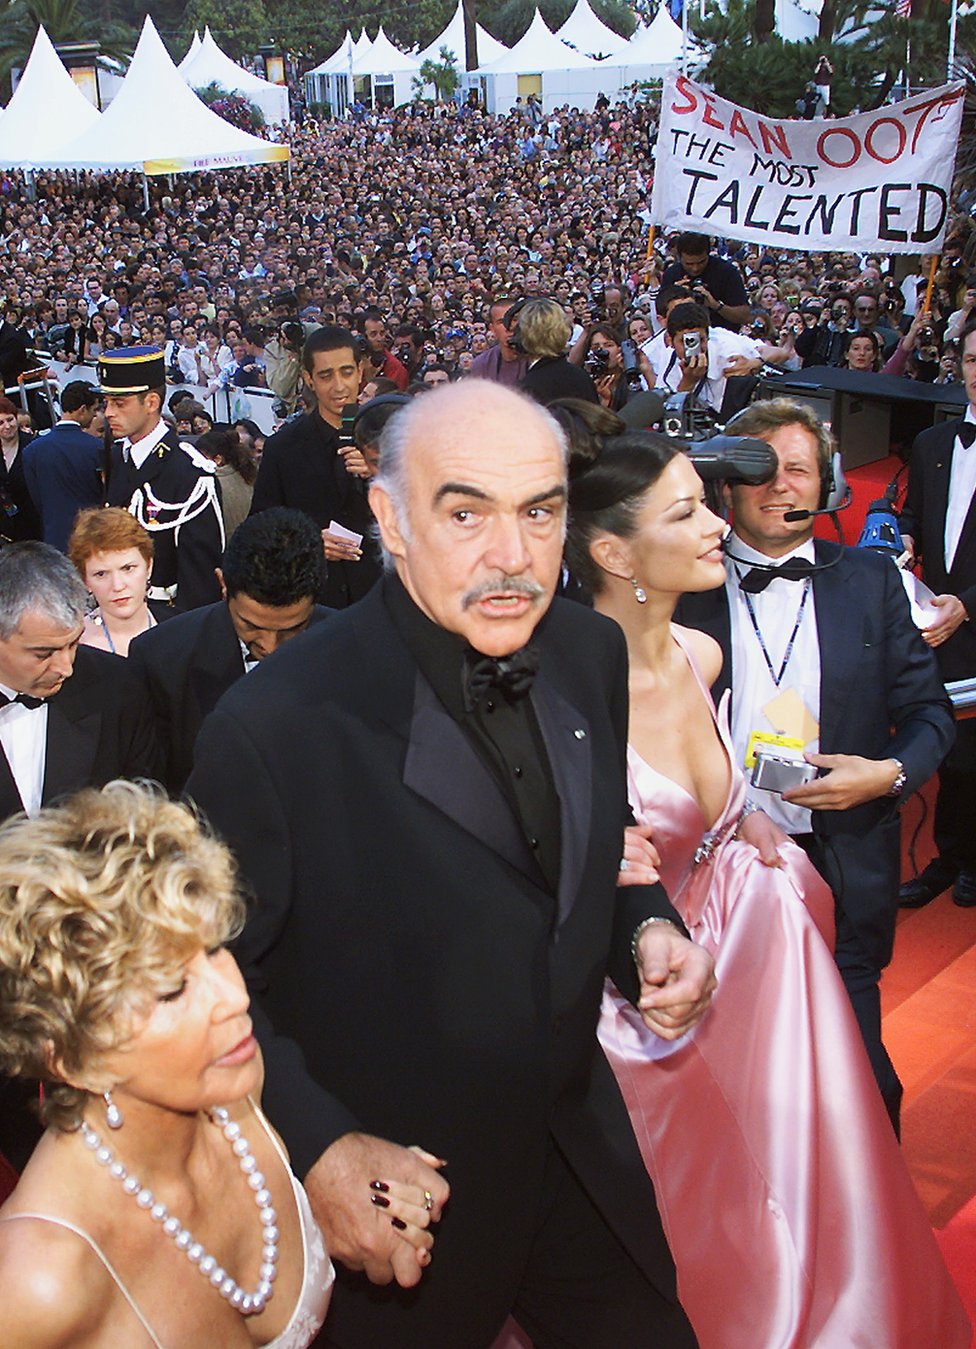 Sean Connery, wife Micheline (left) and Catherine Zeta Jones at the Cannes Film Festival in 1999